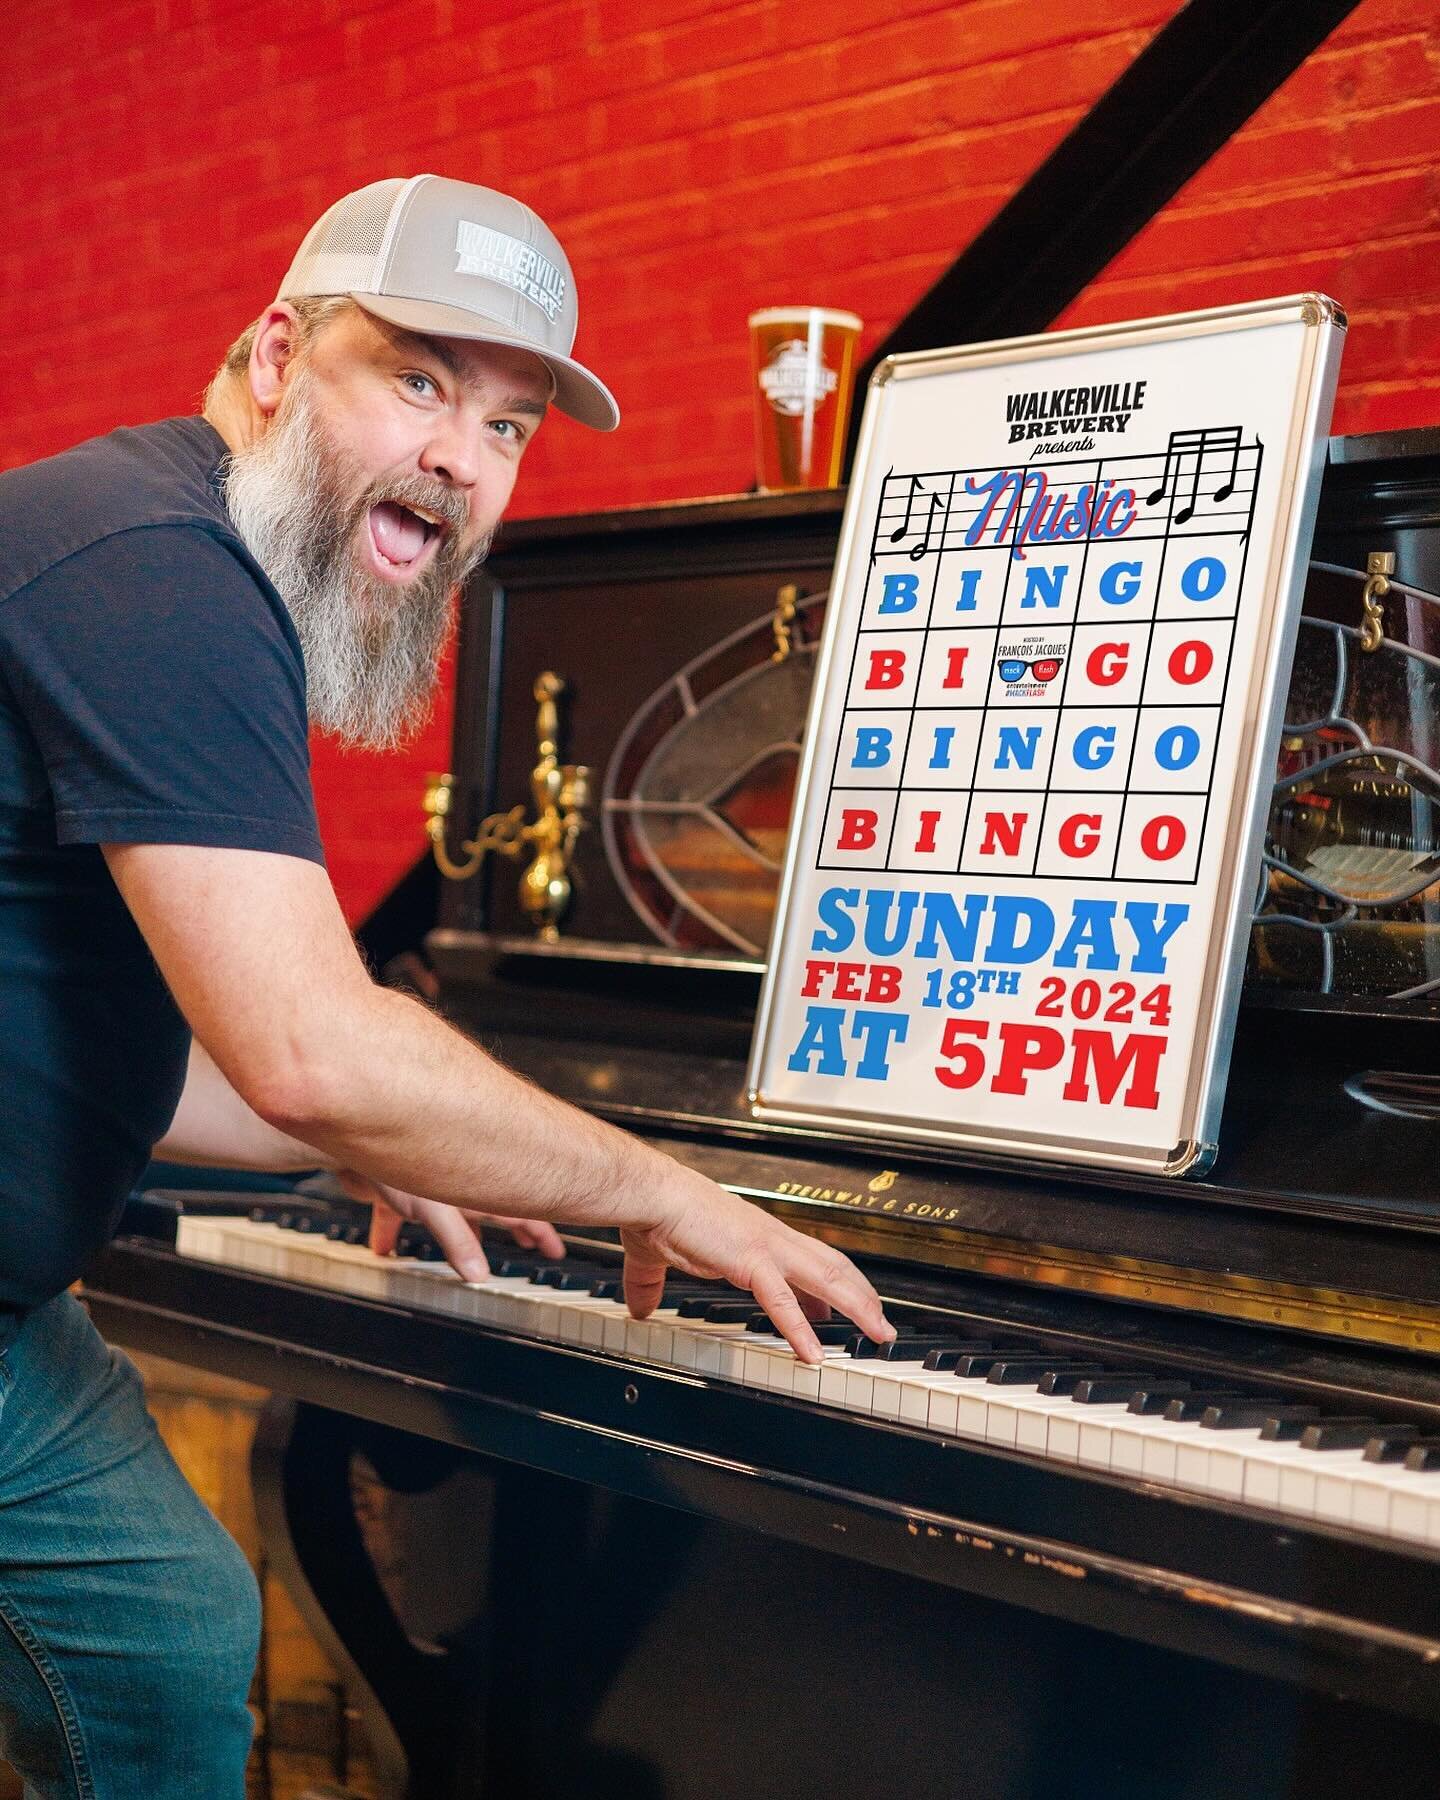 B-I-N-G-O! 🎶

Join us for Music Bingo Trivia THIS Sunday, February 18th at 5pm with your host @mackflash! A night filled with a little bit of bingo, a little bit of trivia and a whole lot of music! 

Music Bingo Trivia is always free to play and gre